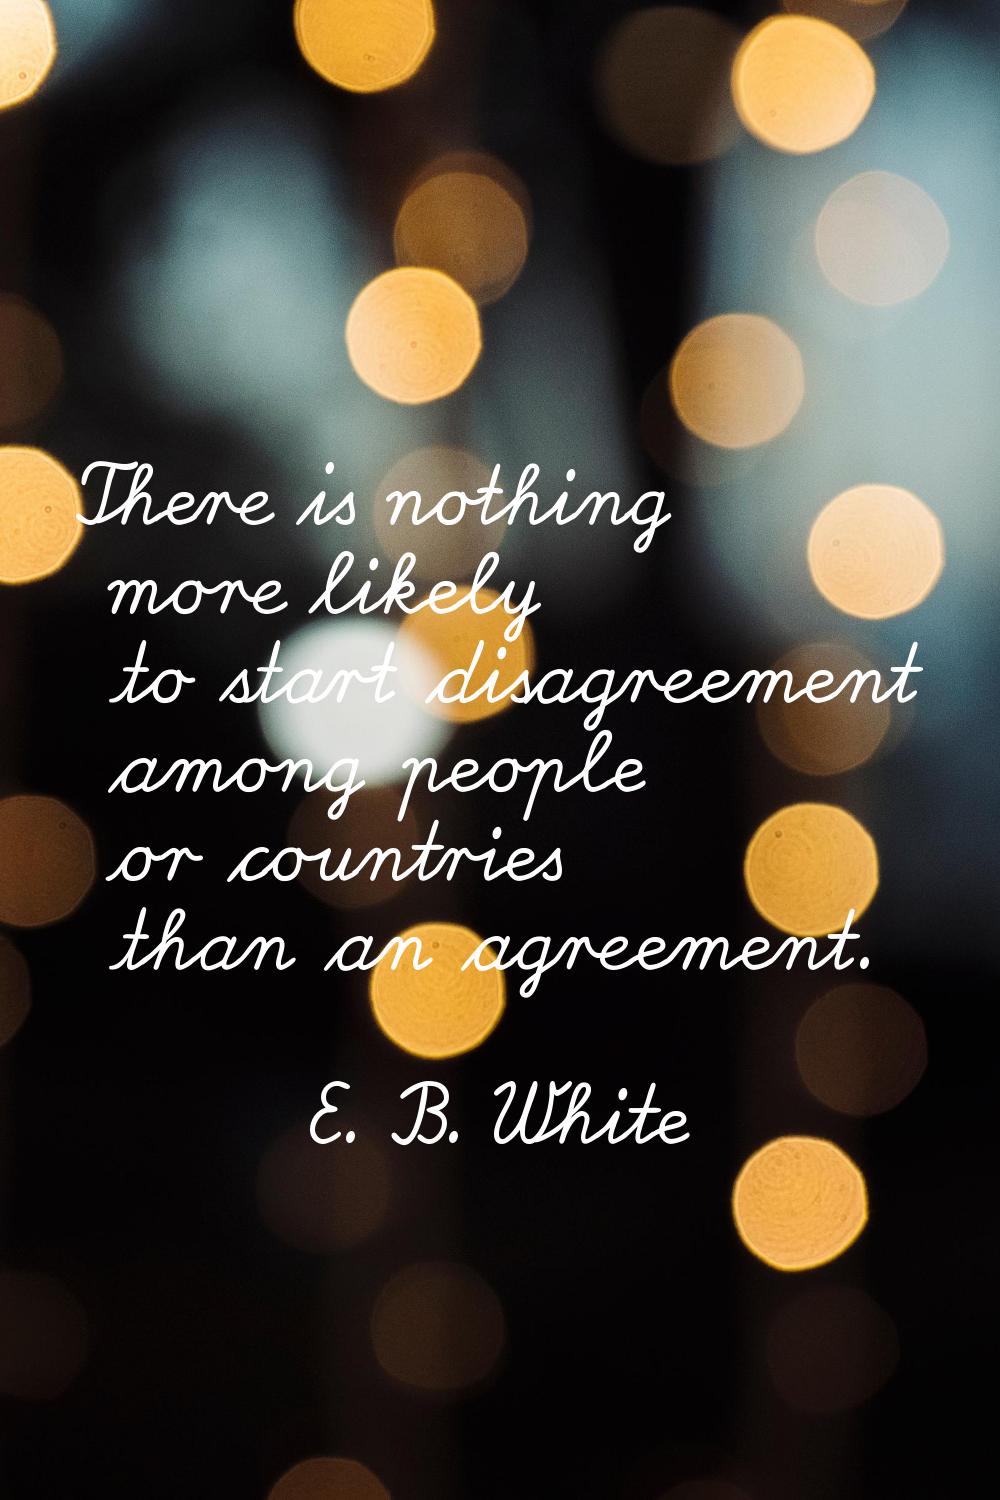 There is nothing more likely to start disagreement among people or countries than an agreement.